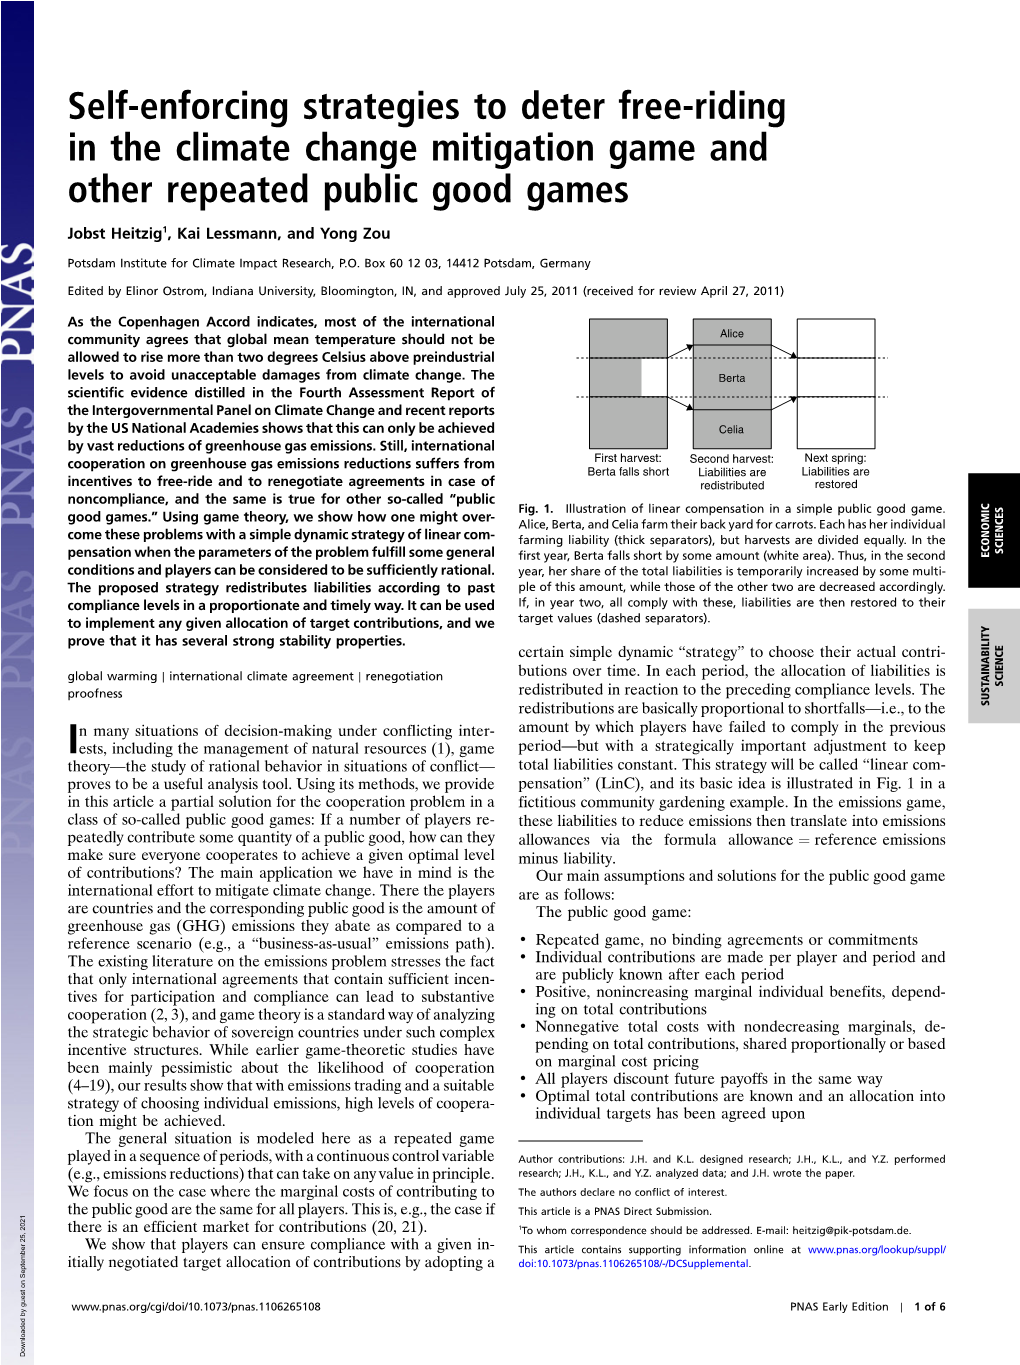 Self-Enforcing Strategies to Deter Free-Riding in the Climate Change Mitigation Game and Other Repeated Public Good Games